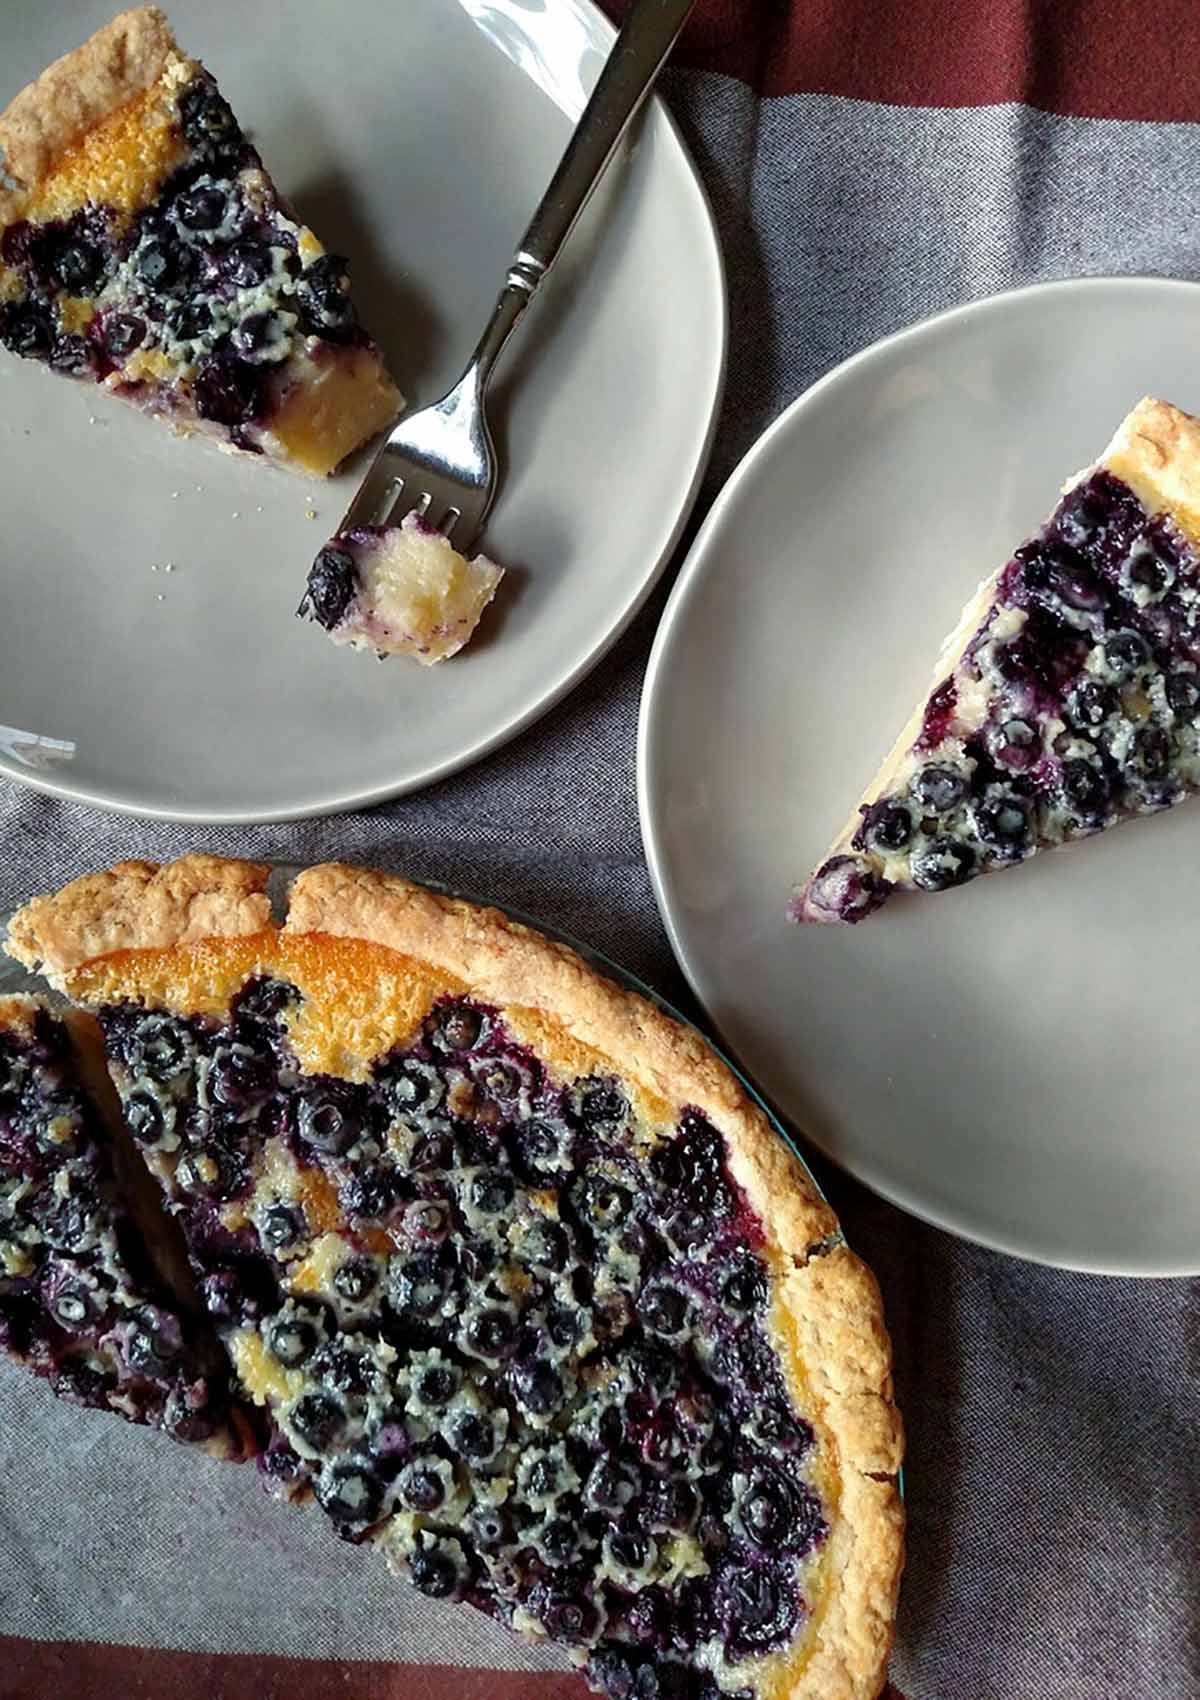 A blueberry custard pie in a pie plate, with 2 dessert plates with a slice of pie on them, one with a fork and a bite missing.